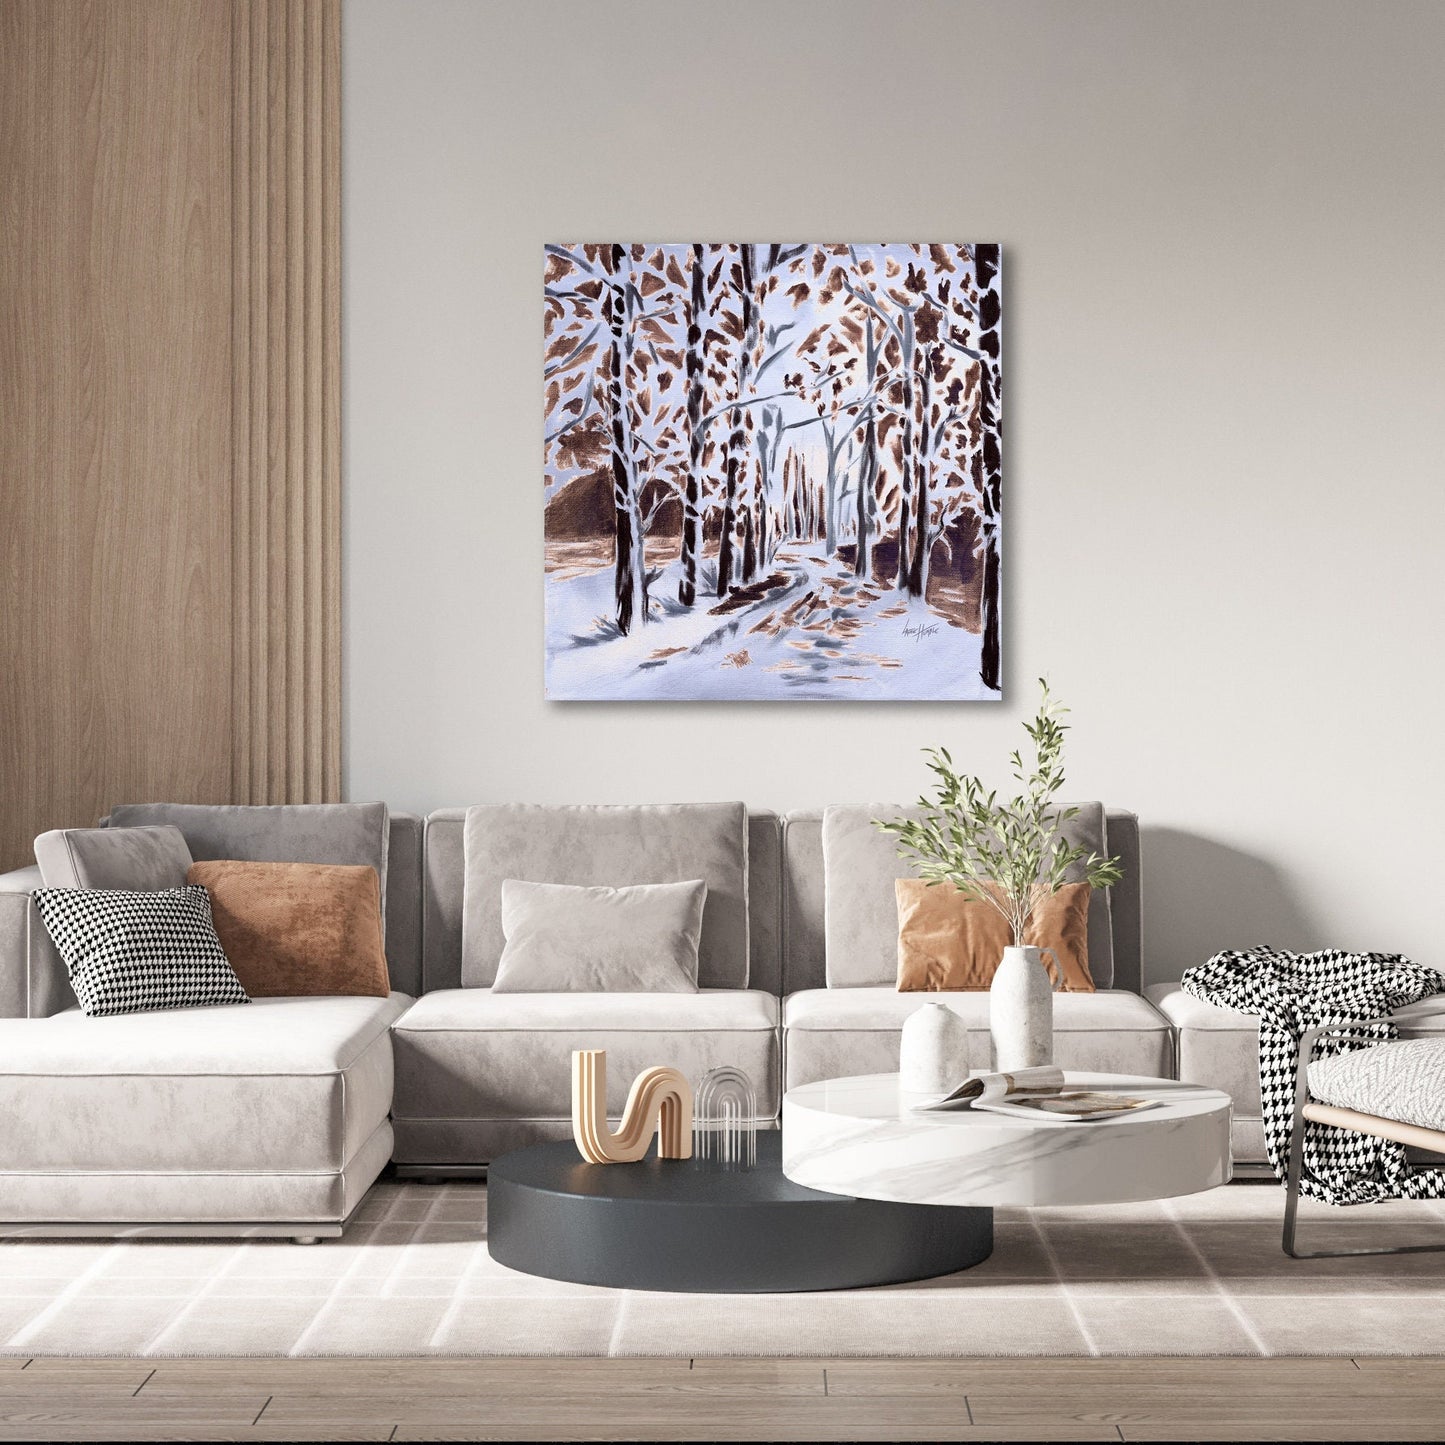 Snowy Landscape, Above Bed Decor, Canvas print, Oil Painting, Rustic Home Decor, Large Wall Art